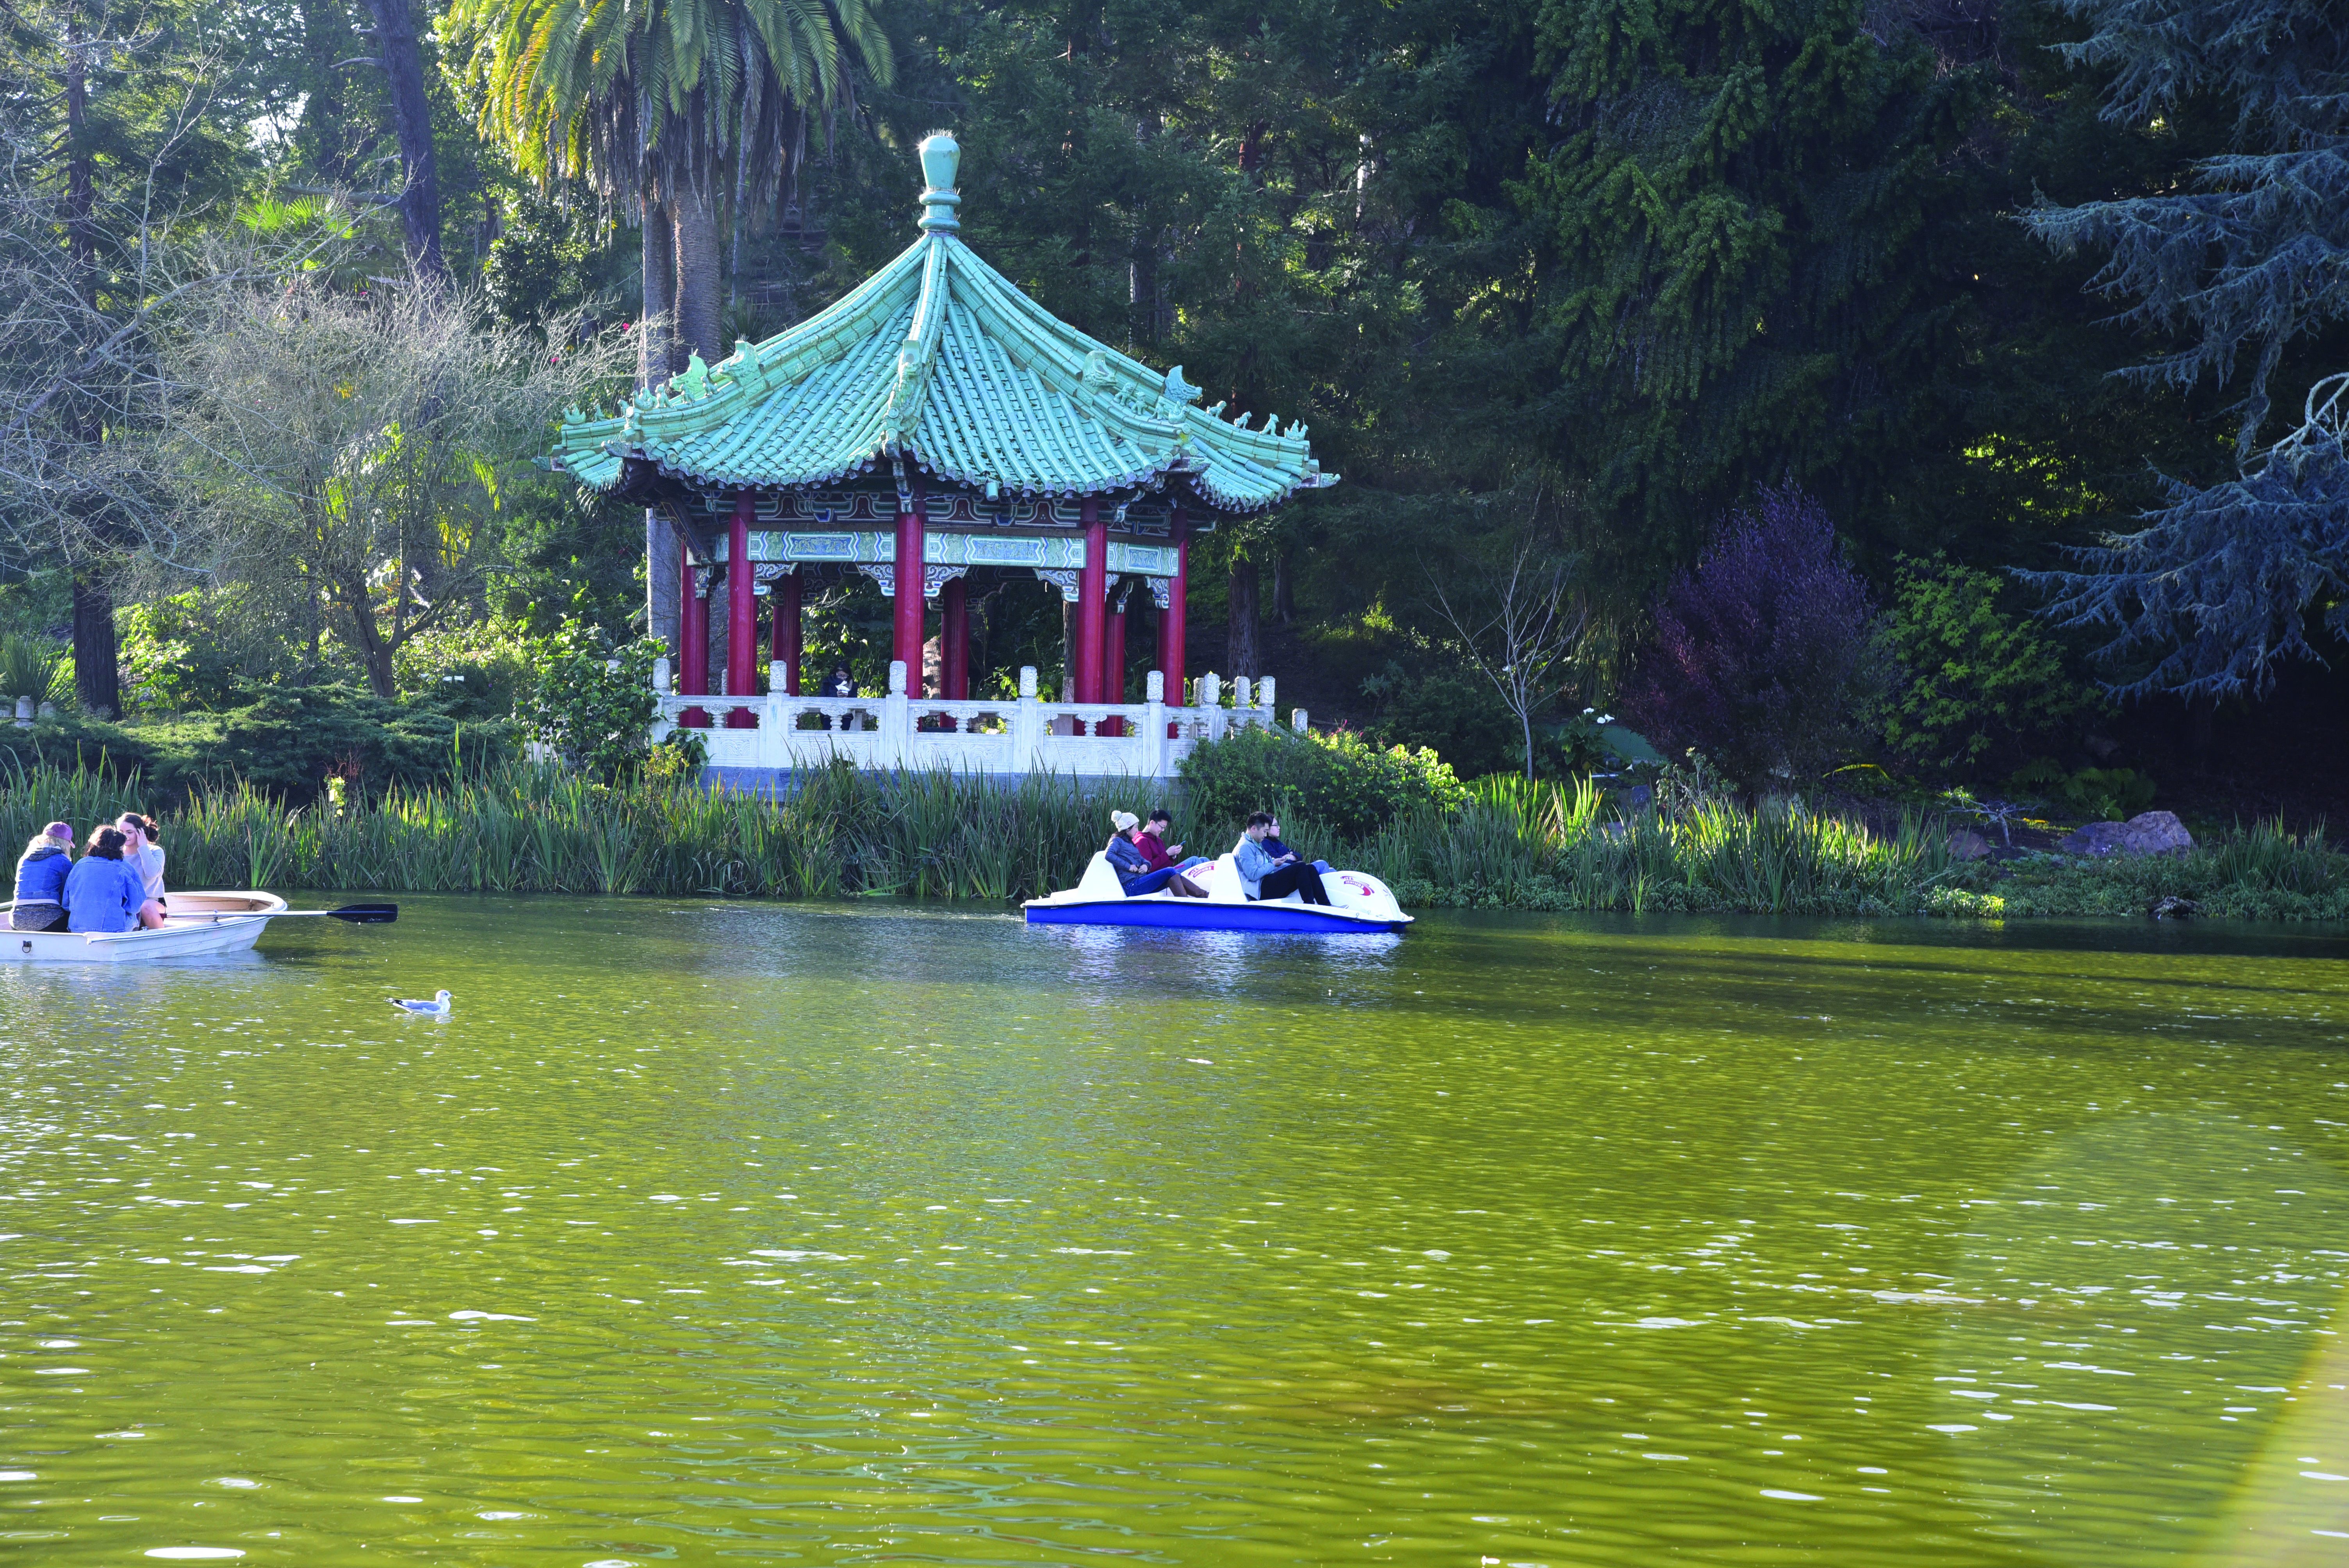  Paddle boaters glide next to a Chinese gazebo through the waters of Stowe Lake, an area nestled in Golden Gate Park. 